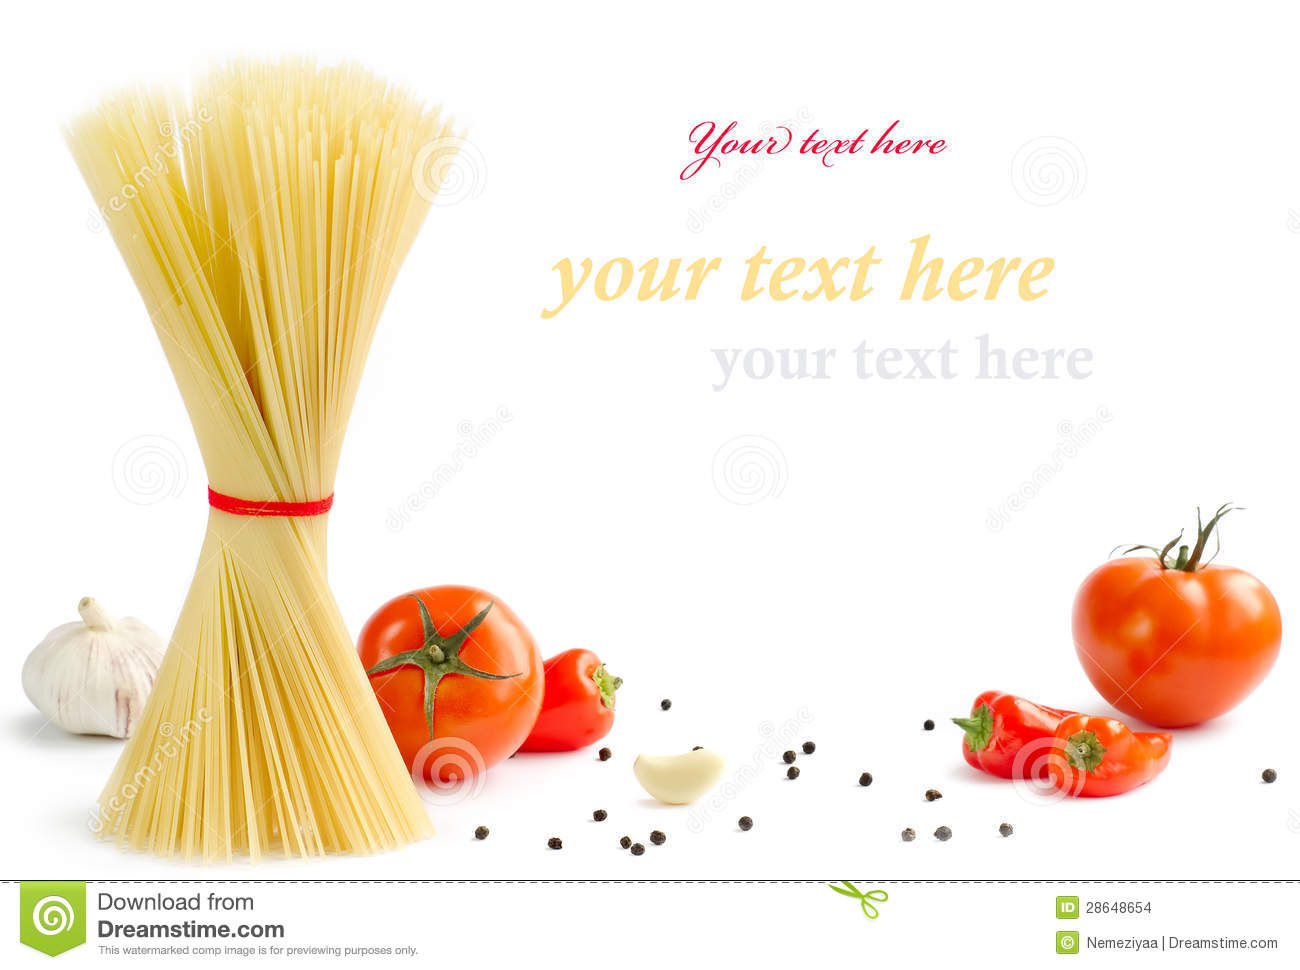 Italian Pasta With Tomatoes Stock Images   Image  28648654